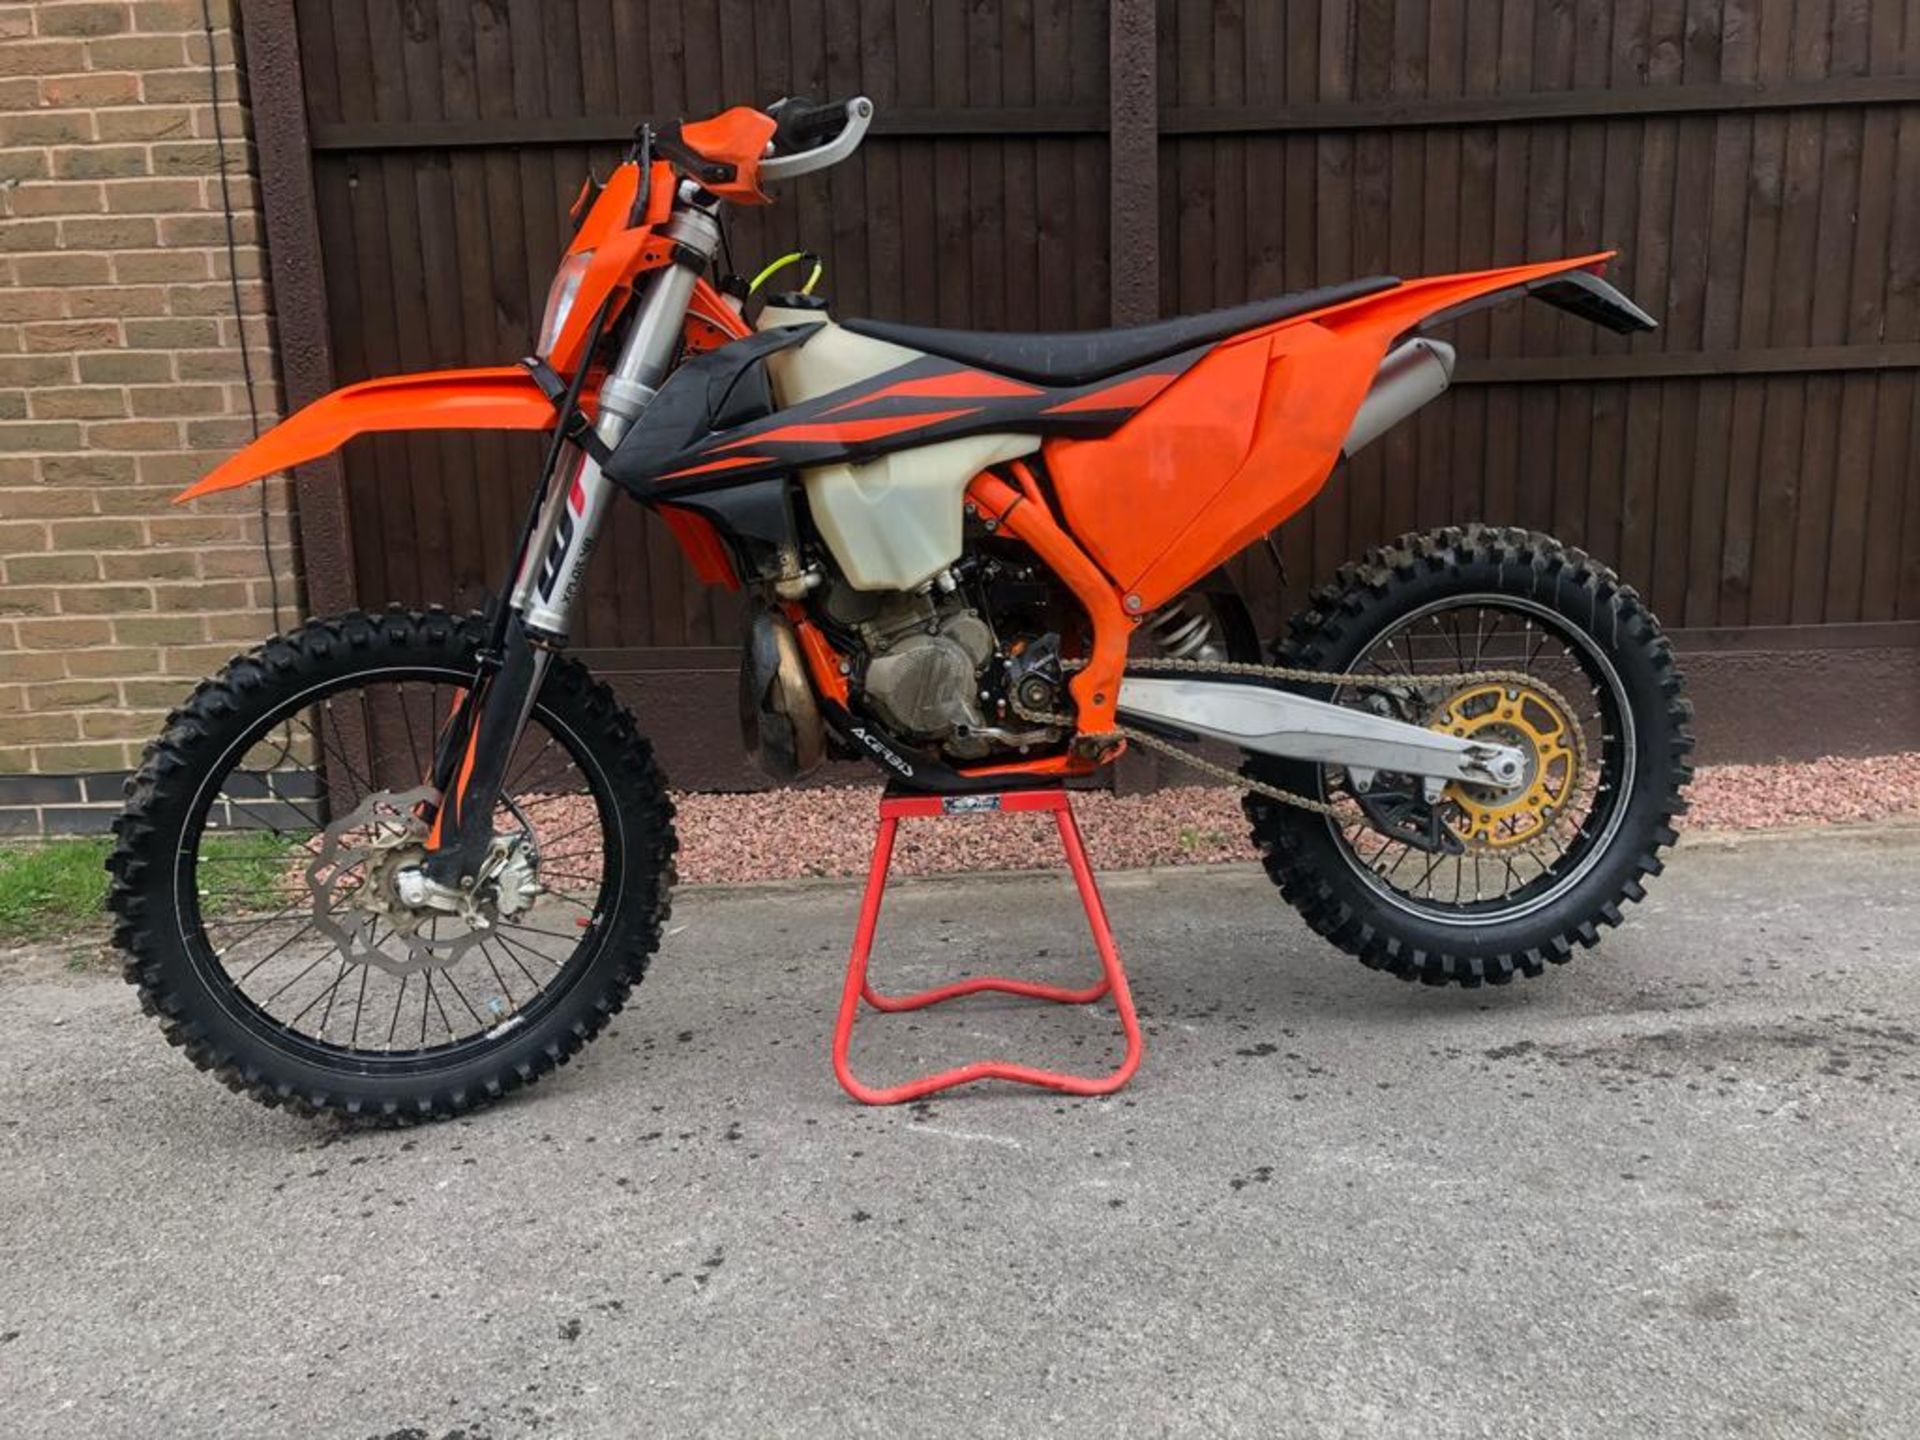 2019 KTM 300 EXC TPI 19, 293CC, LOW HOURS, 1 OWNER FROM NEW *NO VAT* - Image 3 of 6